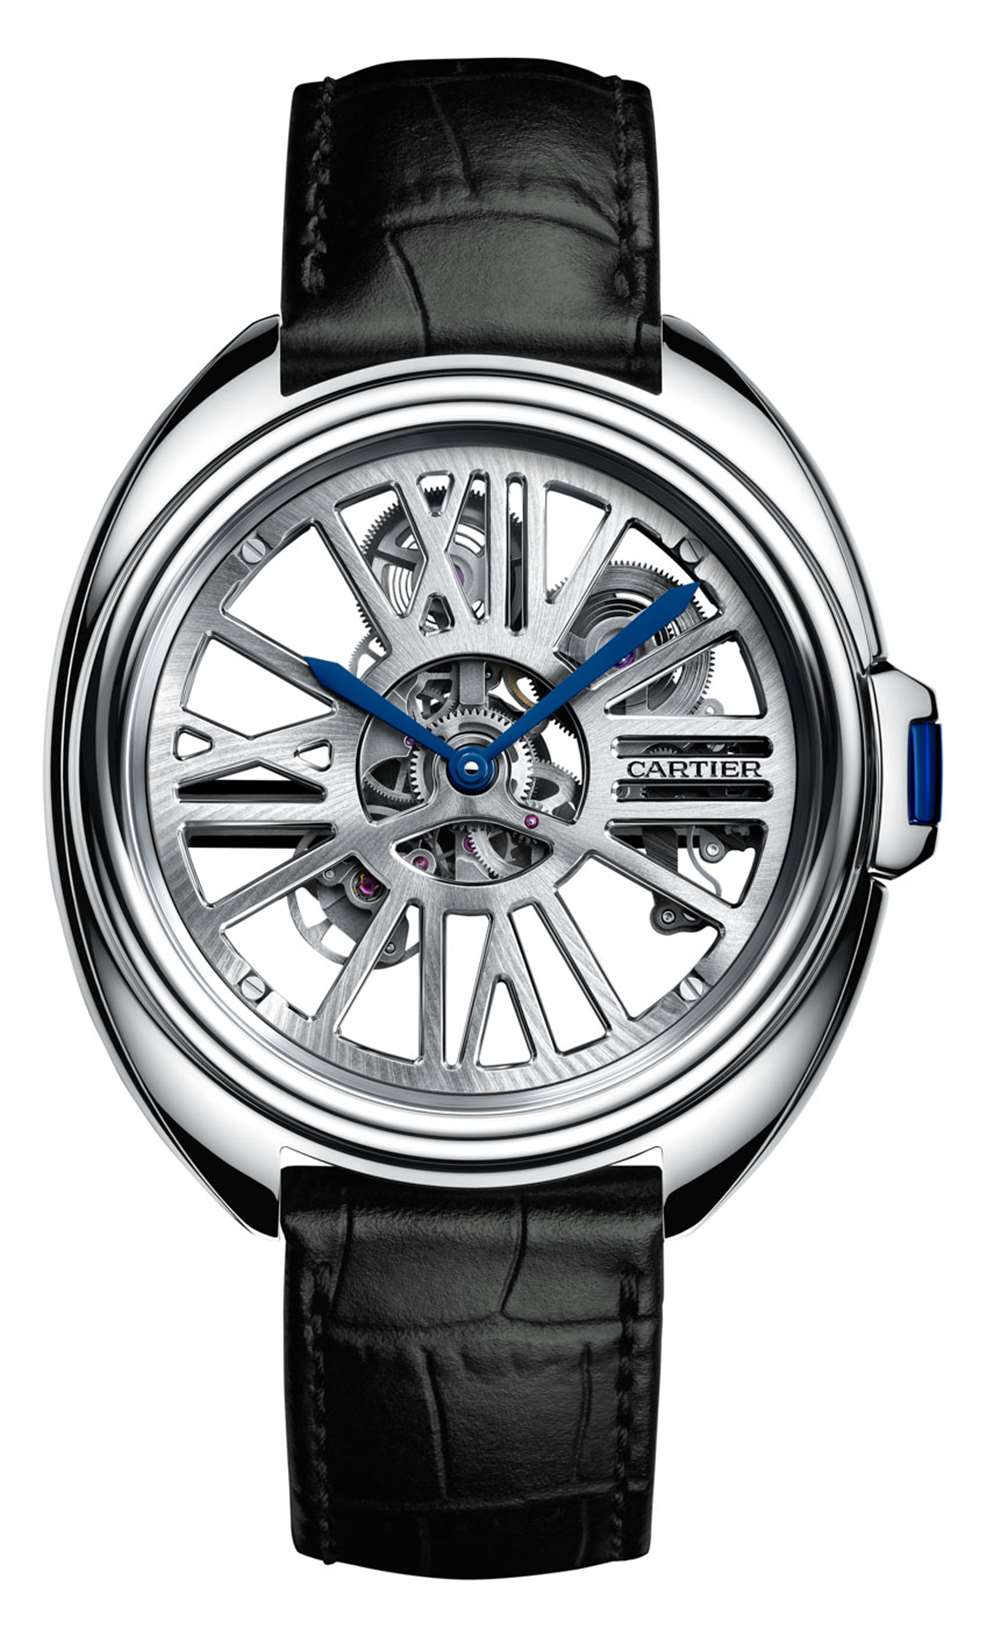 Cartier-Cle-Skeleton-Automatic-watch-3